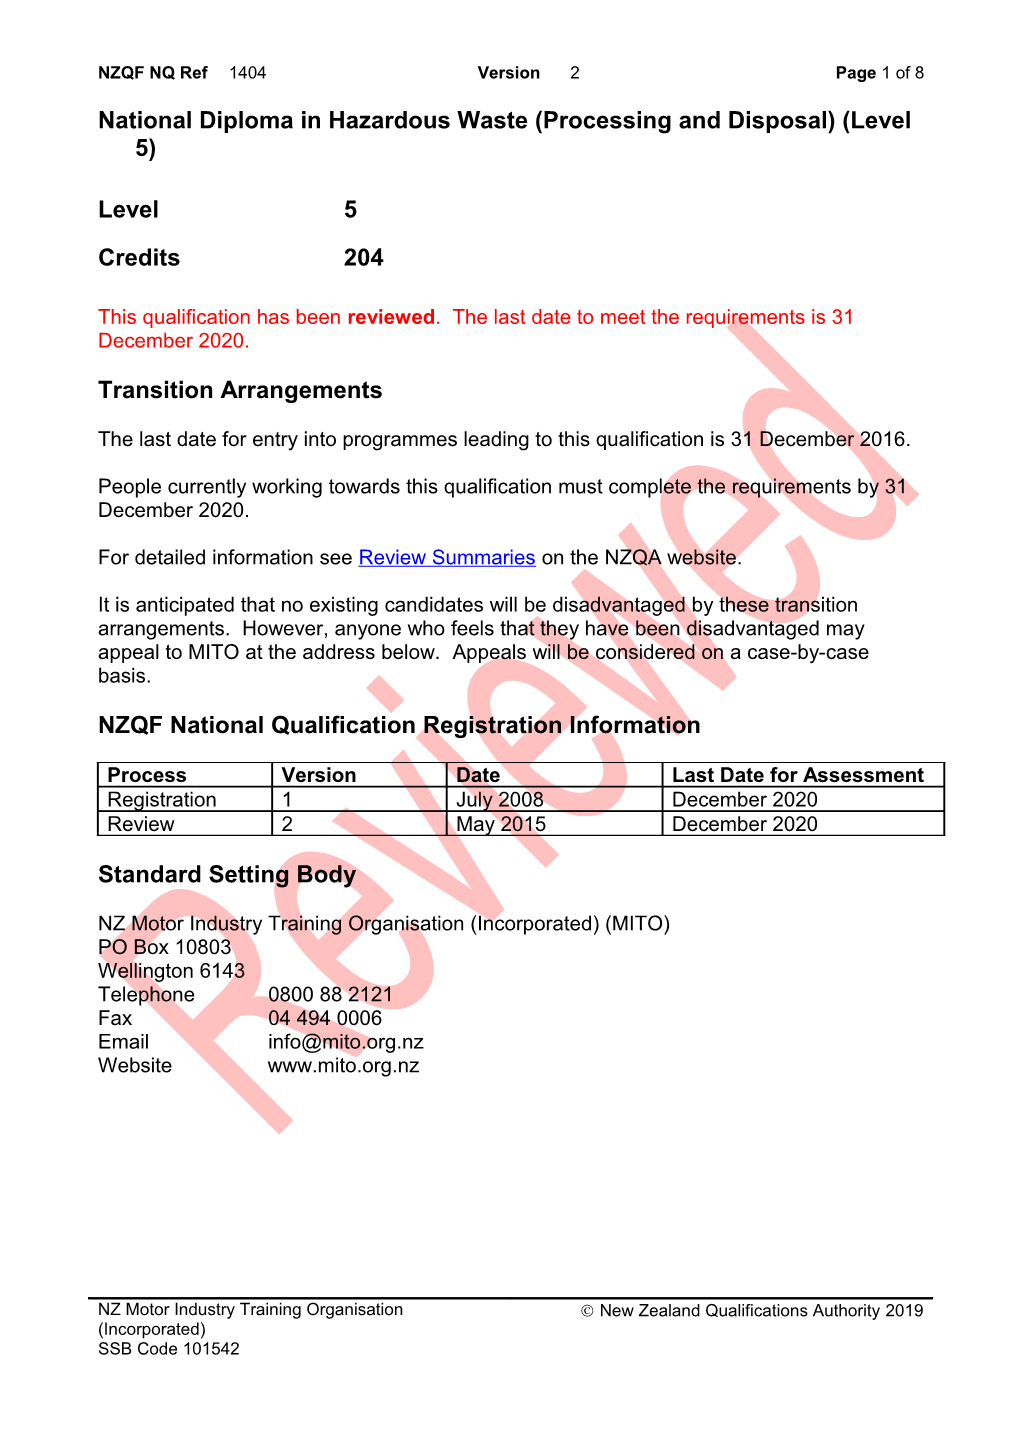 1404 National Diploma in Hazardous Waste (Processing and Disposal) (Level 5)